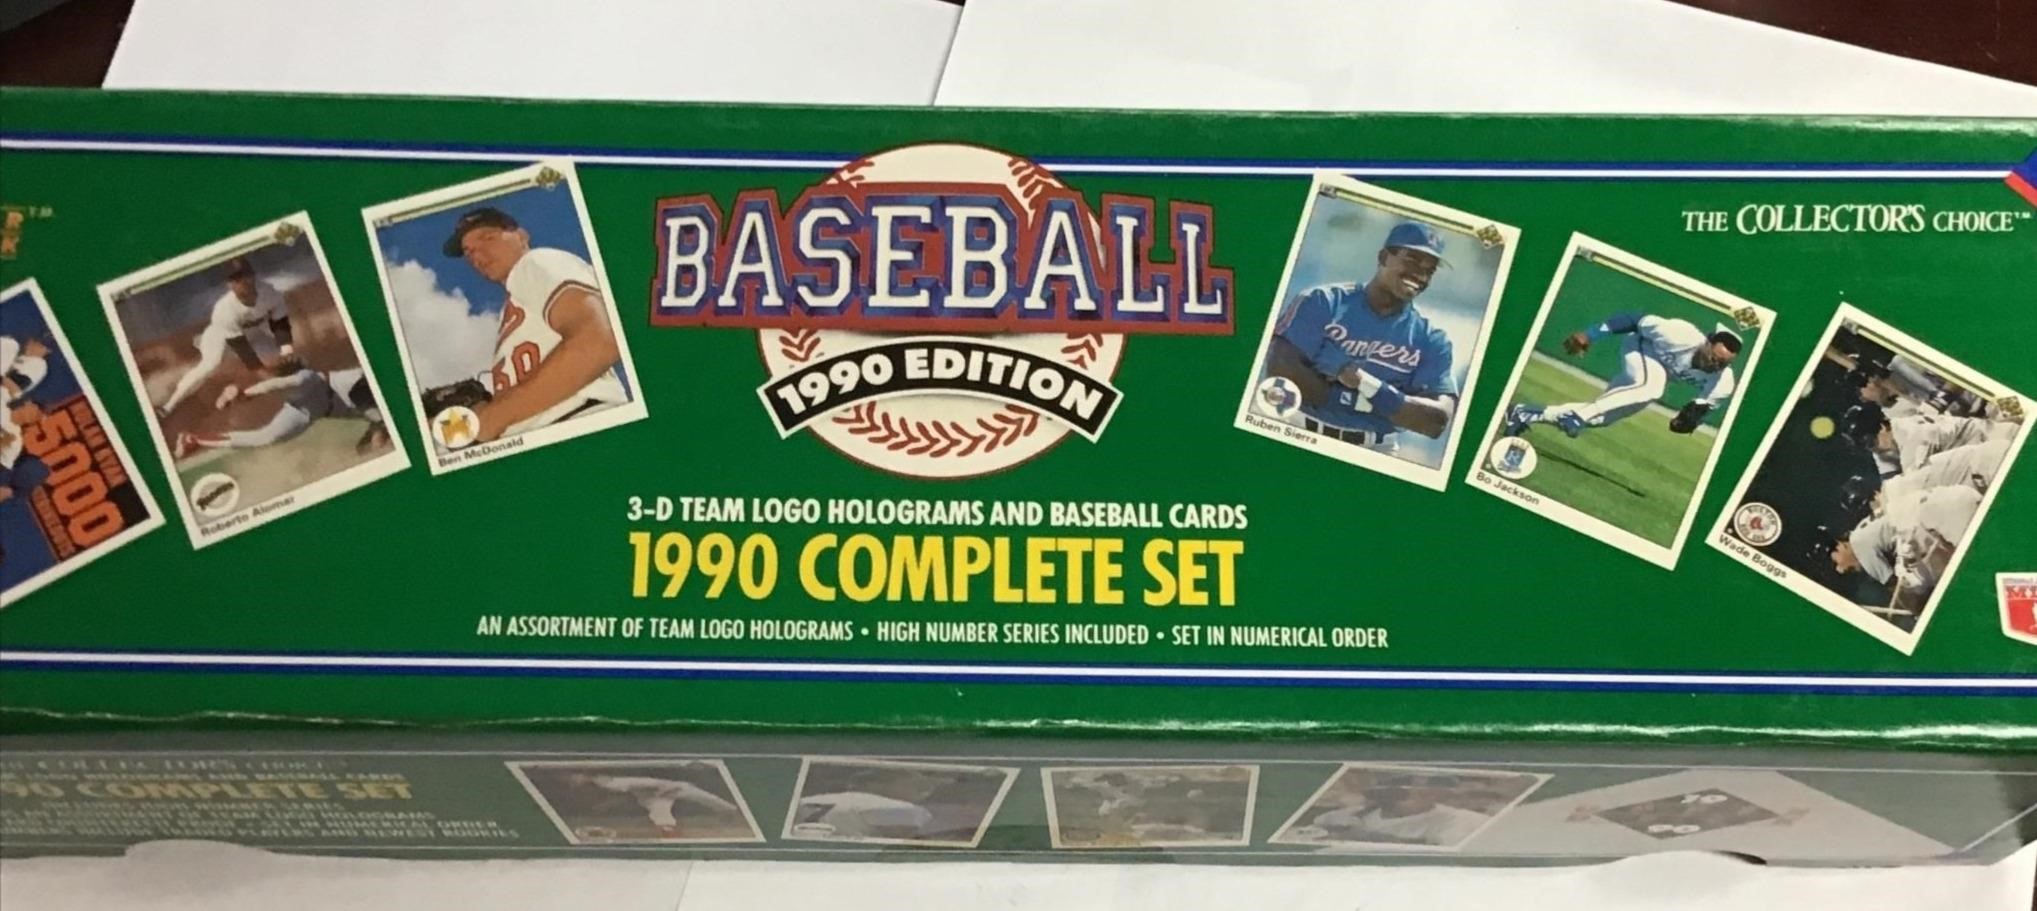 10 JA ALL AMERICAN AUCTION COLLECTIBLES AND MORE